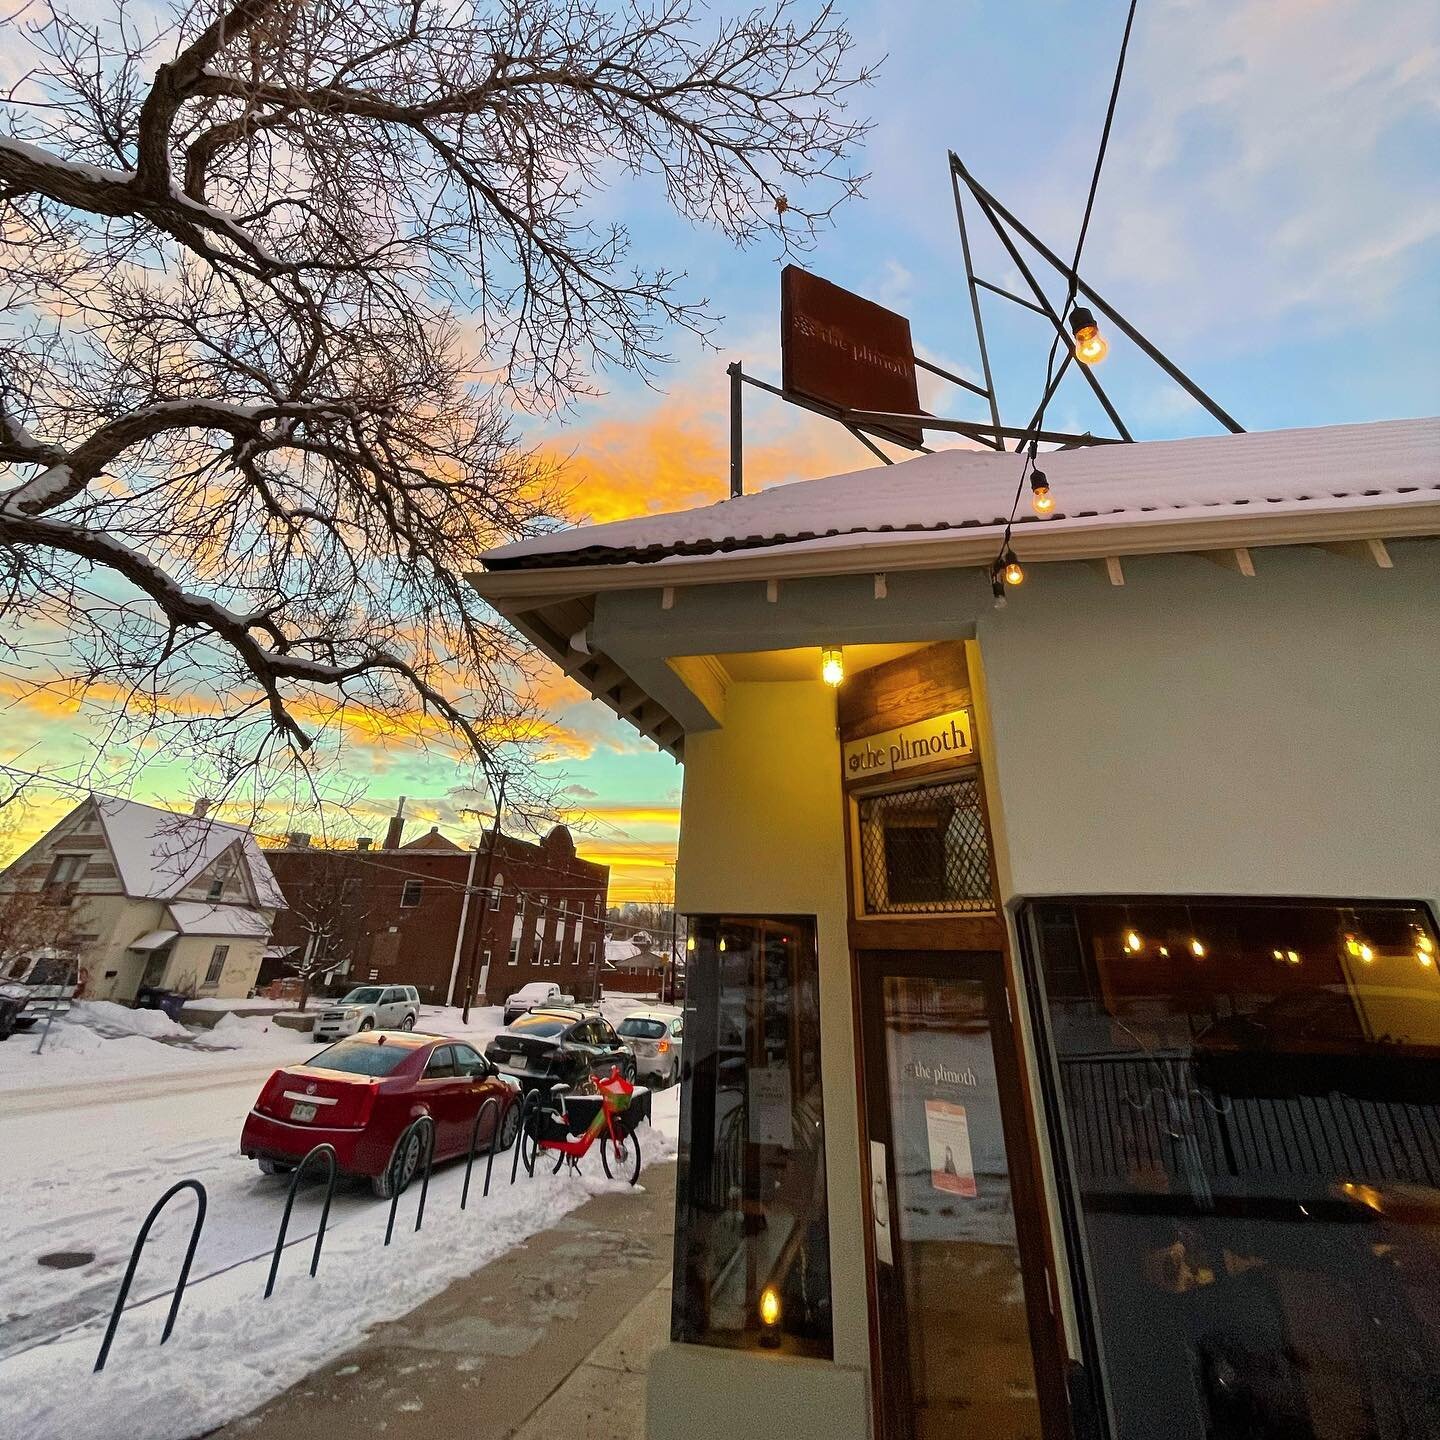 O the weather outside is frightful&hellip;but in here it smells delightful! The Plimoth is open today, the 23rd, and 24th! Call for a spot!

#winterweather #sunsetphotography #skylanddenver #cityparkdenver #diningoutdenver #denverfoodie